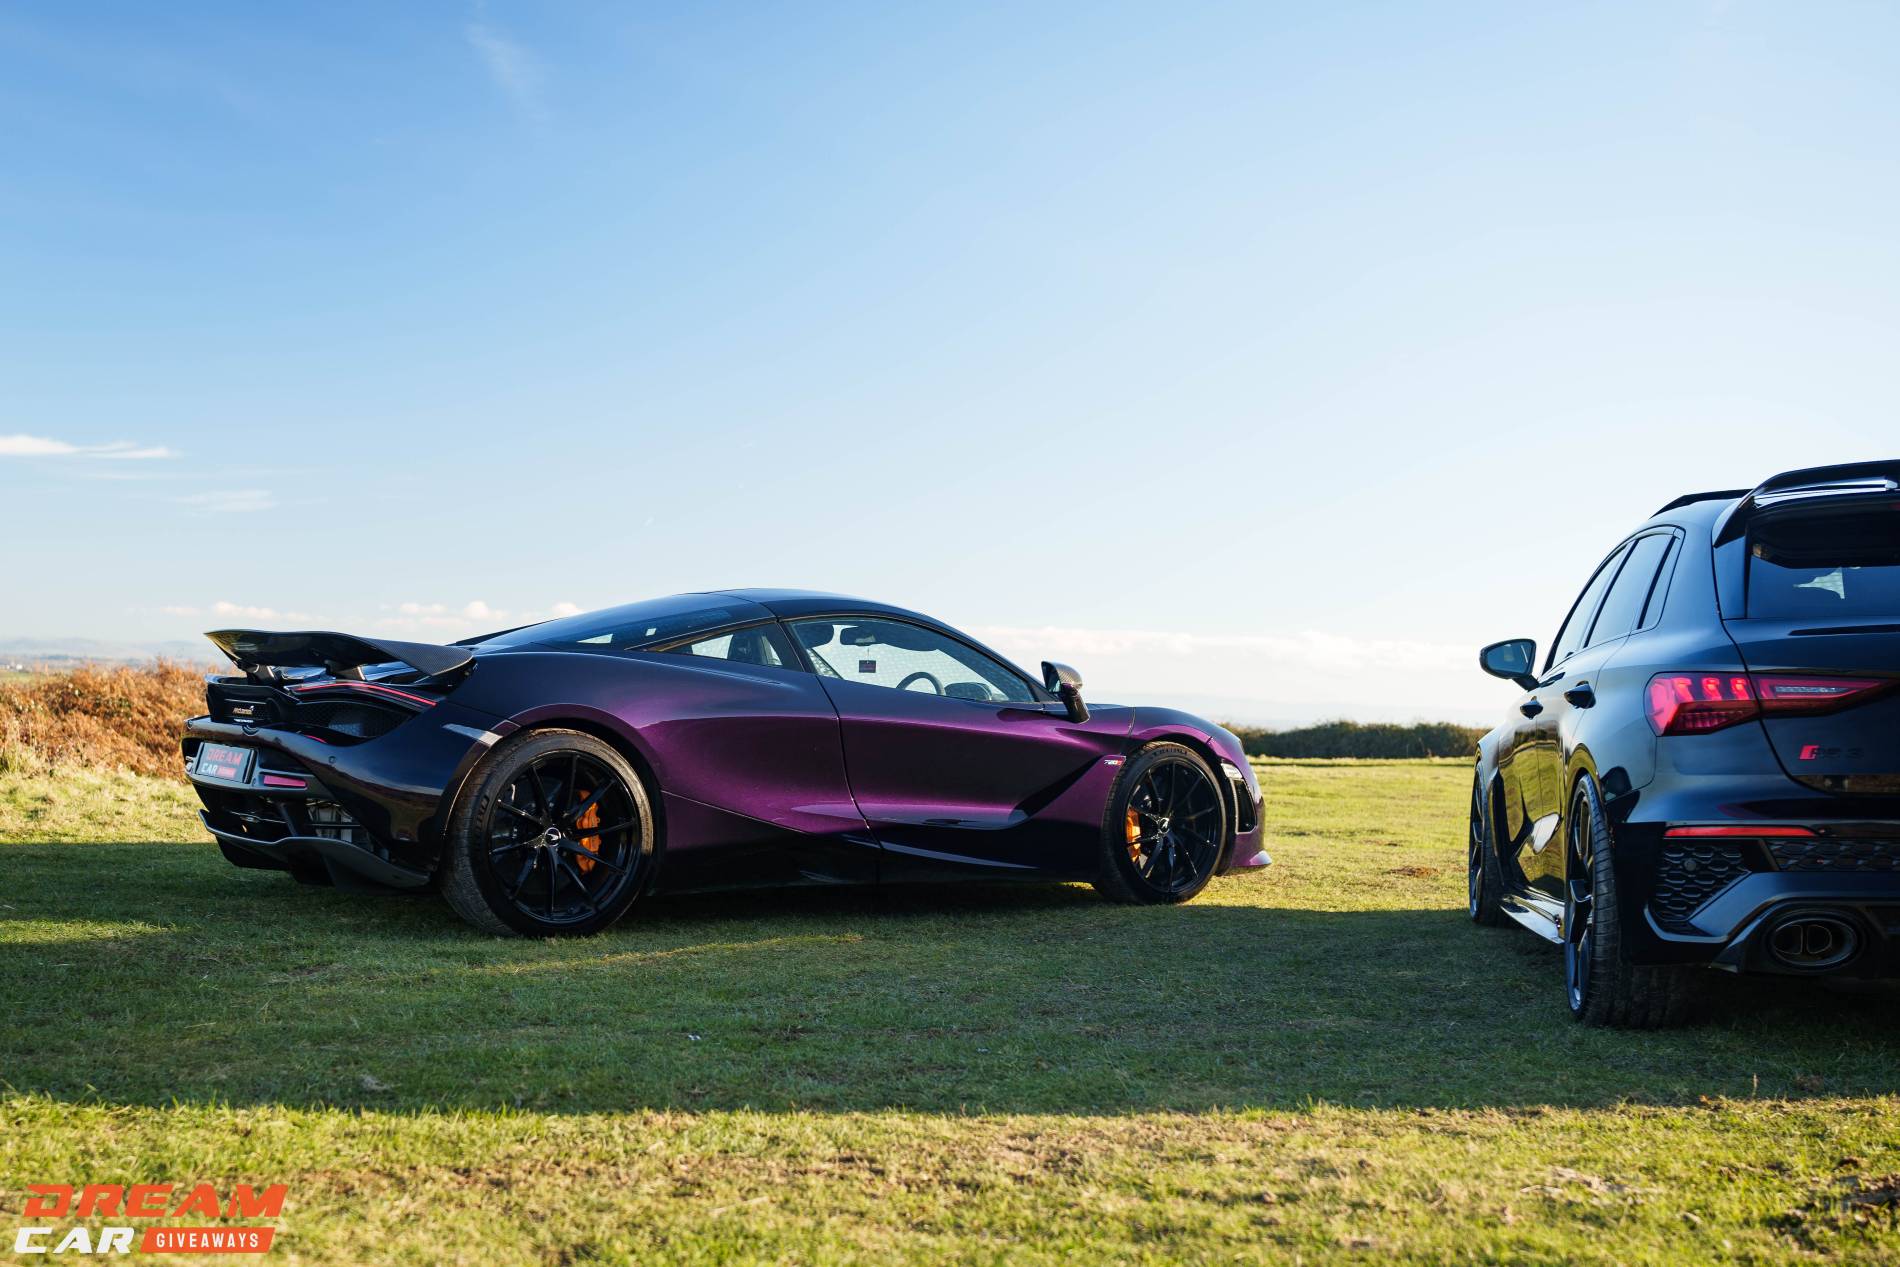 Win this Mclaren 720S and 2023 Audi RS3 & £5,000 or £172,000 Tax Free